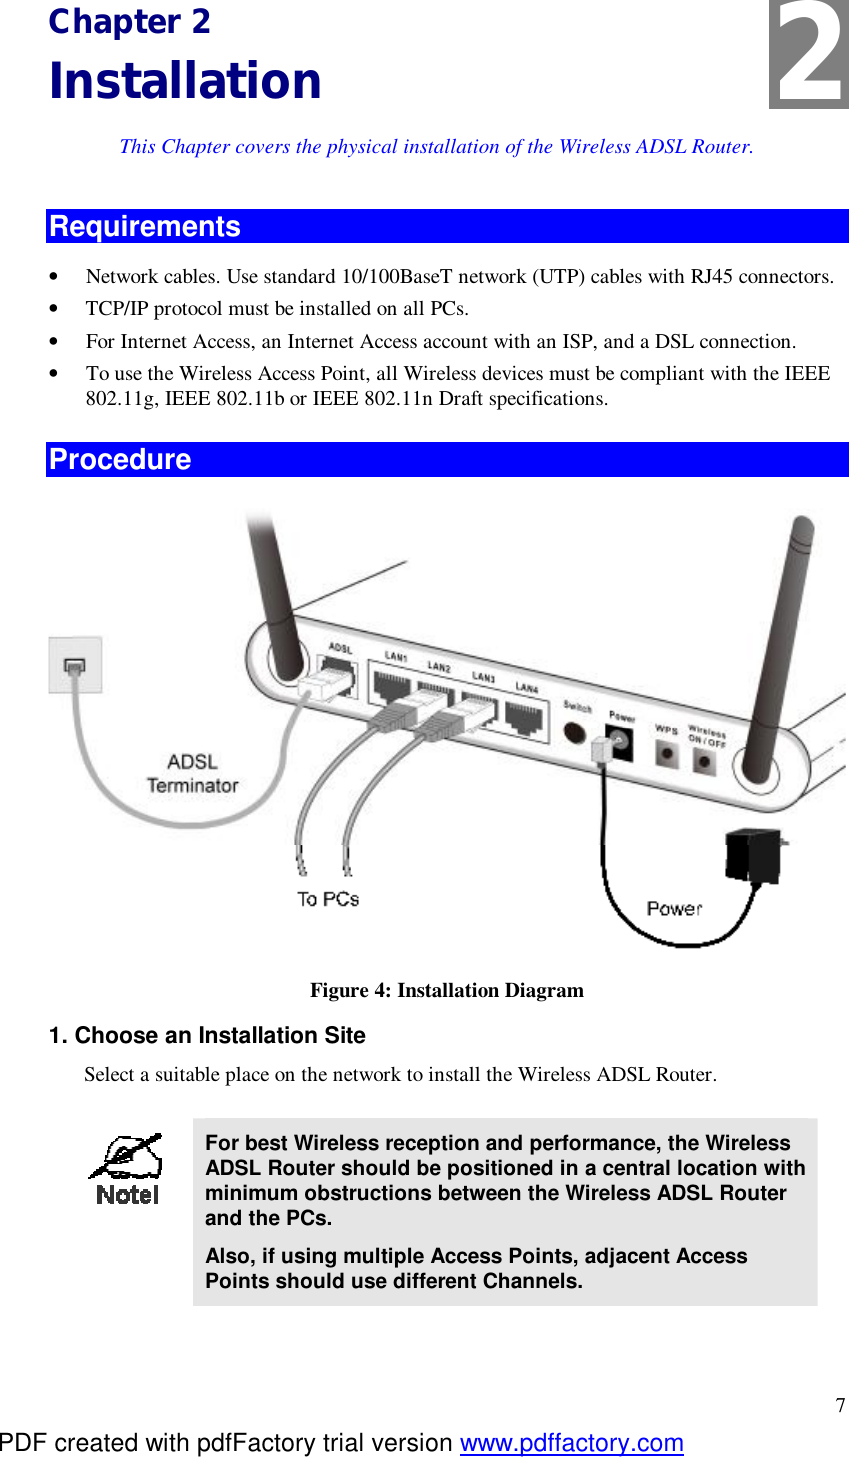  7 Chapter 2 Installation This Chapter covers the physical installation of the Wireless ADSL Router. Requirements •  Network cables. Use standard 10/100BaseT network (UTP) cables with RJ45 connectors. •  TCP/IP protocol must be installed on all PCs. •  For Internet Access, an Internet Access account with an ISP, and a DSL connection. •  To use the Wireless Access Point, all Wireless devices must be compliant with the IEEE 802.11g, IEEE 802.11b or IEEE 802.11n Draft specifications. Procedure  Figure 4: Installation Diagram 1. Choose an Installation Site Select a suitable place on the network to install the Wireless ADSL Router.    For best Wireless reception and performance, the Wireless ADSL Router should be positioned in a central location with minimum obstructions between the Wireless ADSL Router and the PCs. Also, if using multiple Access Points, adjacent Access Points should use different Channels.  2 PDF created with pdfFactory trial version www.pdffactory.com